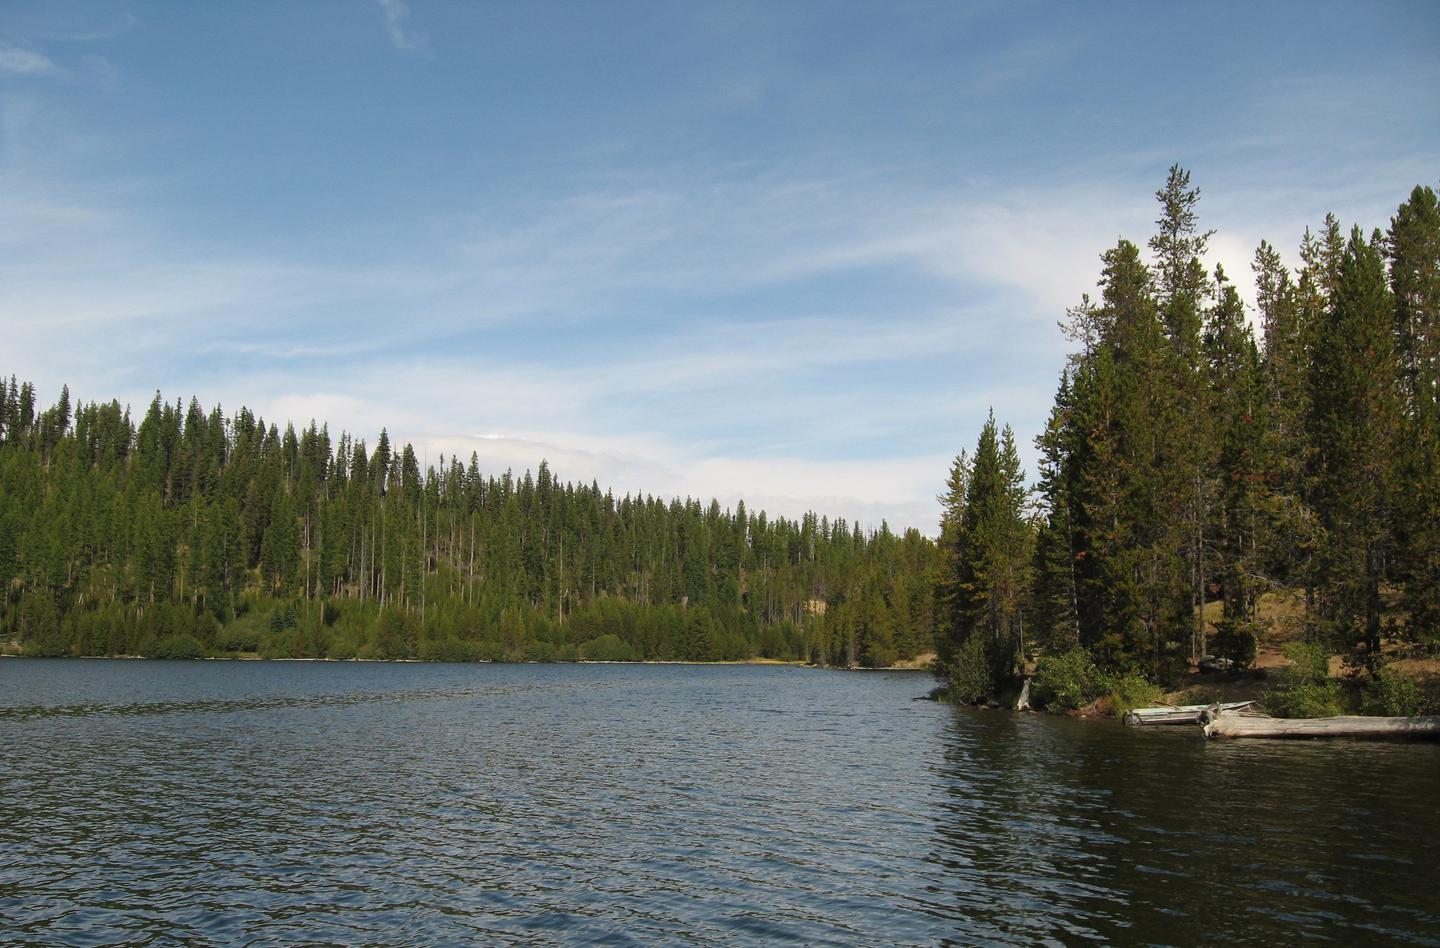 lake water with dense conifers along the shoreOlive Lake